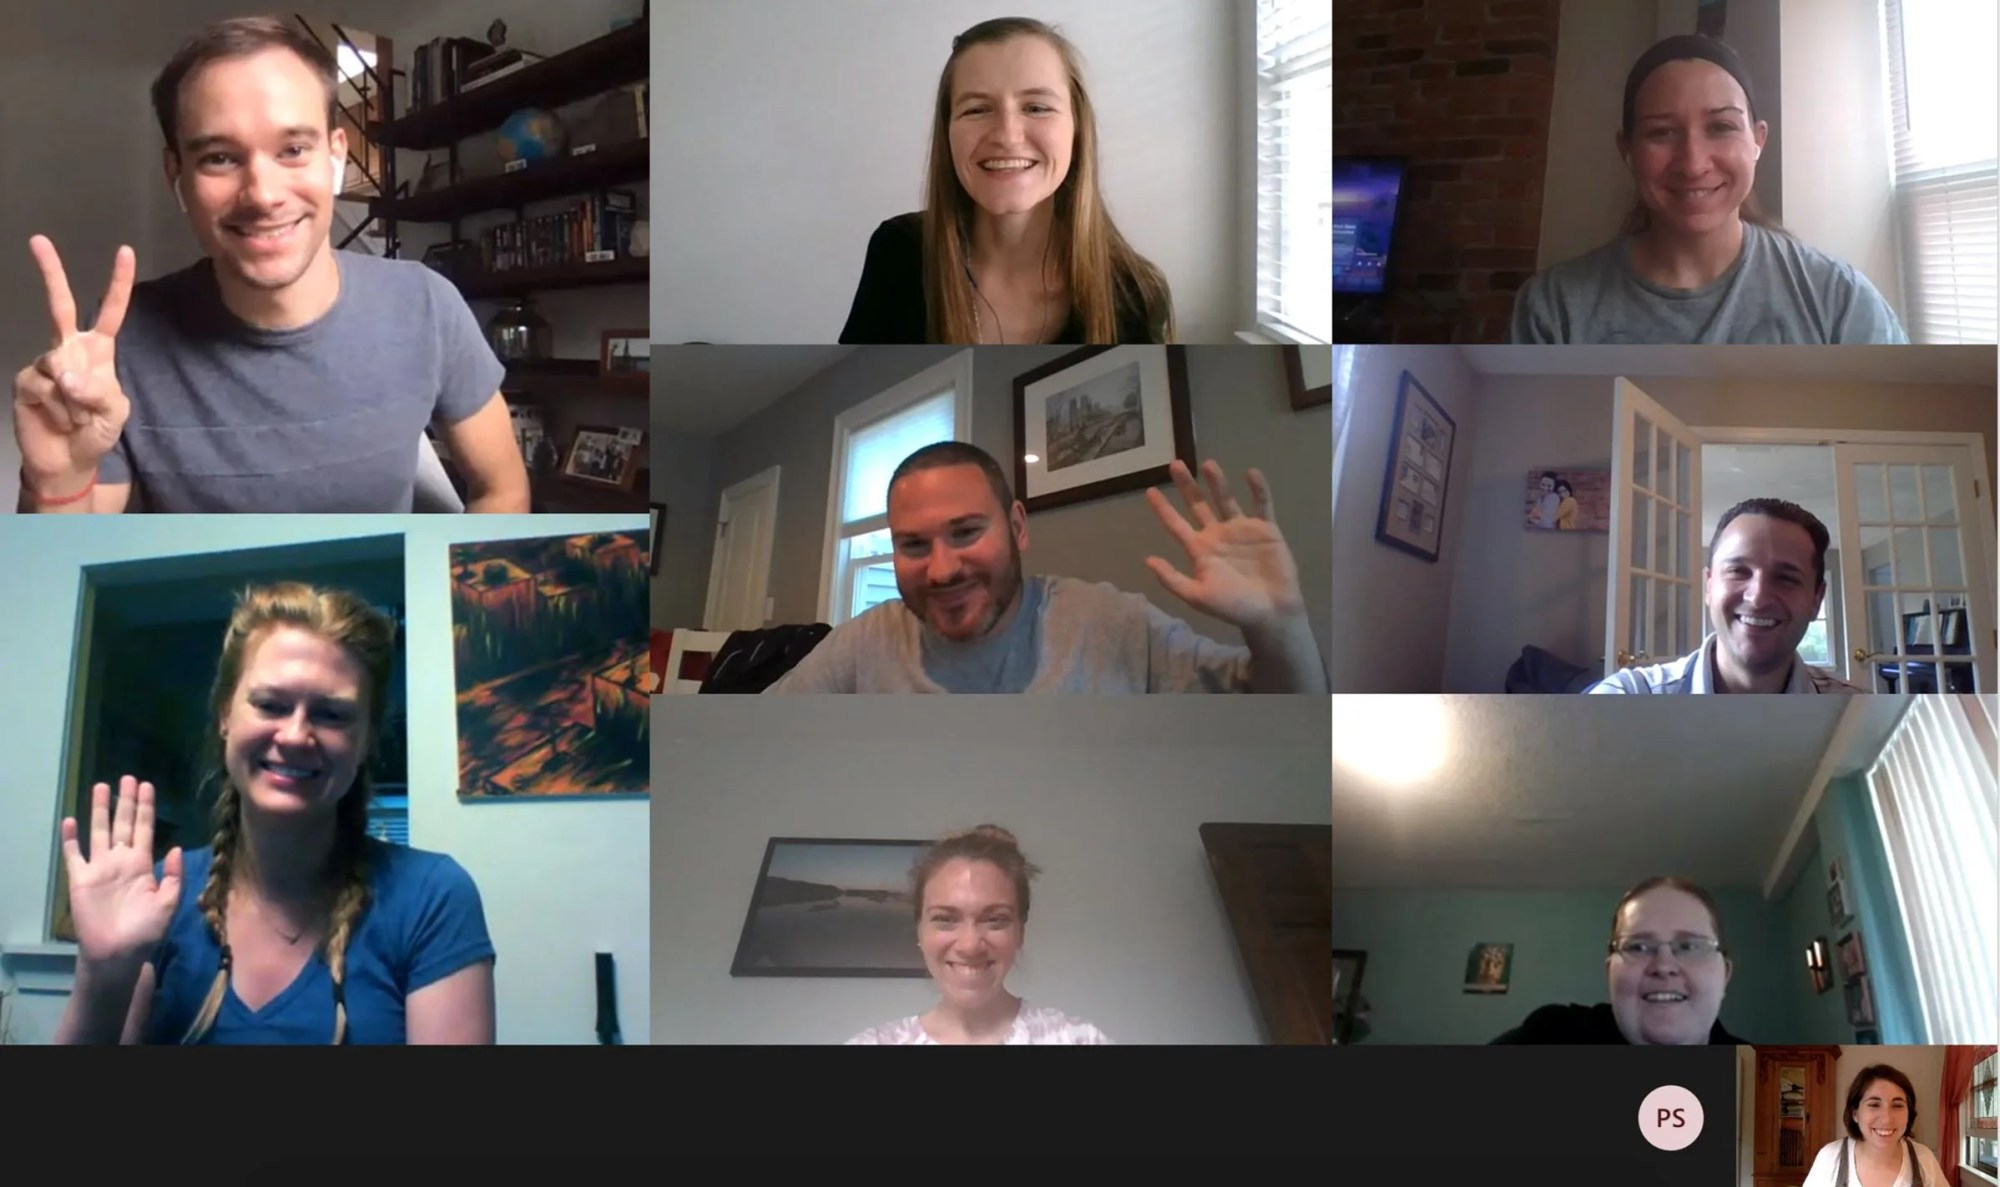 9 people smiling on a Zoom call.